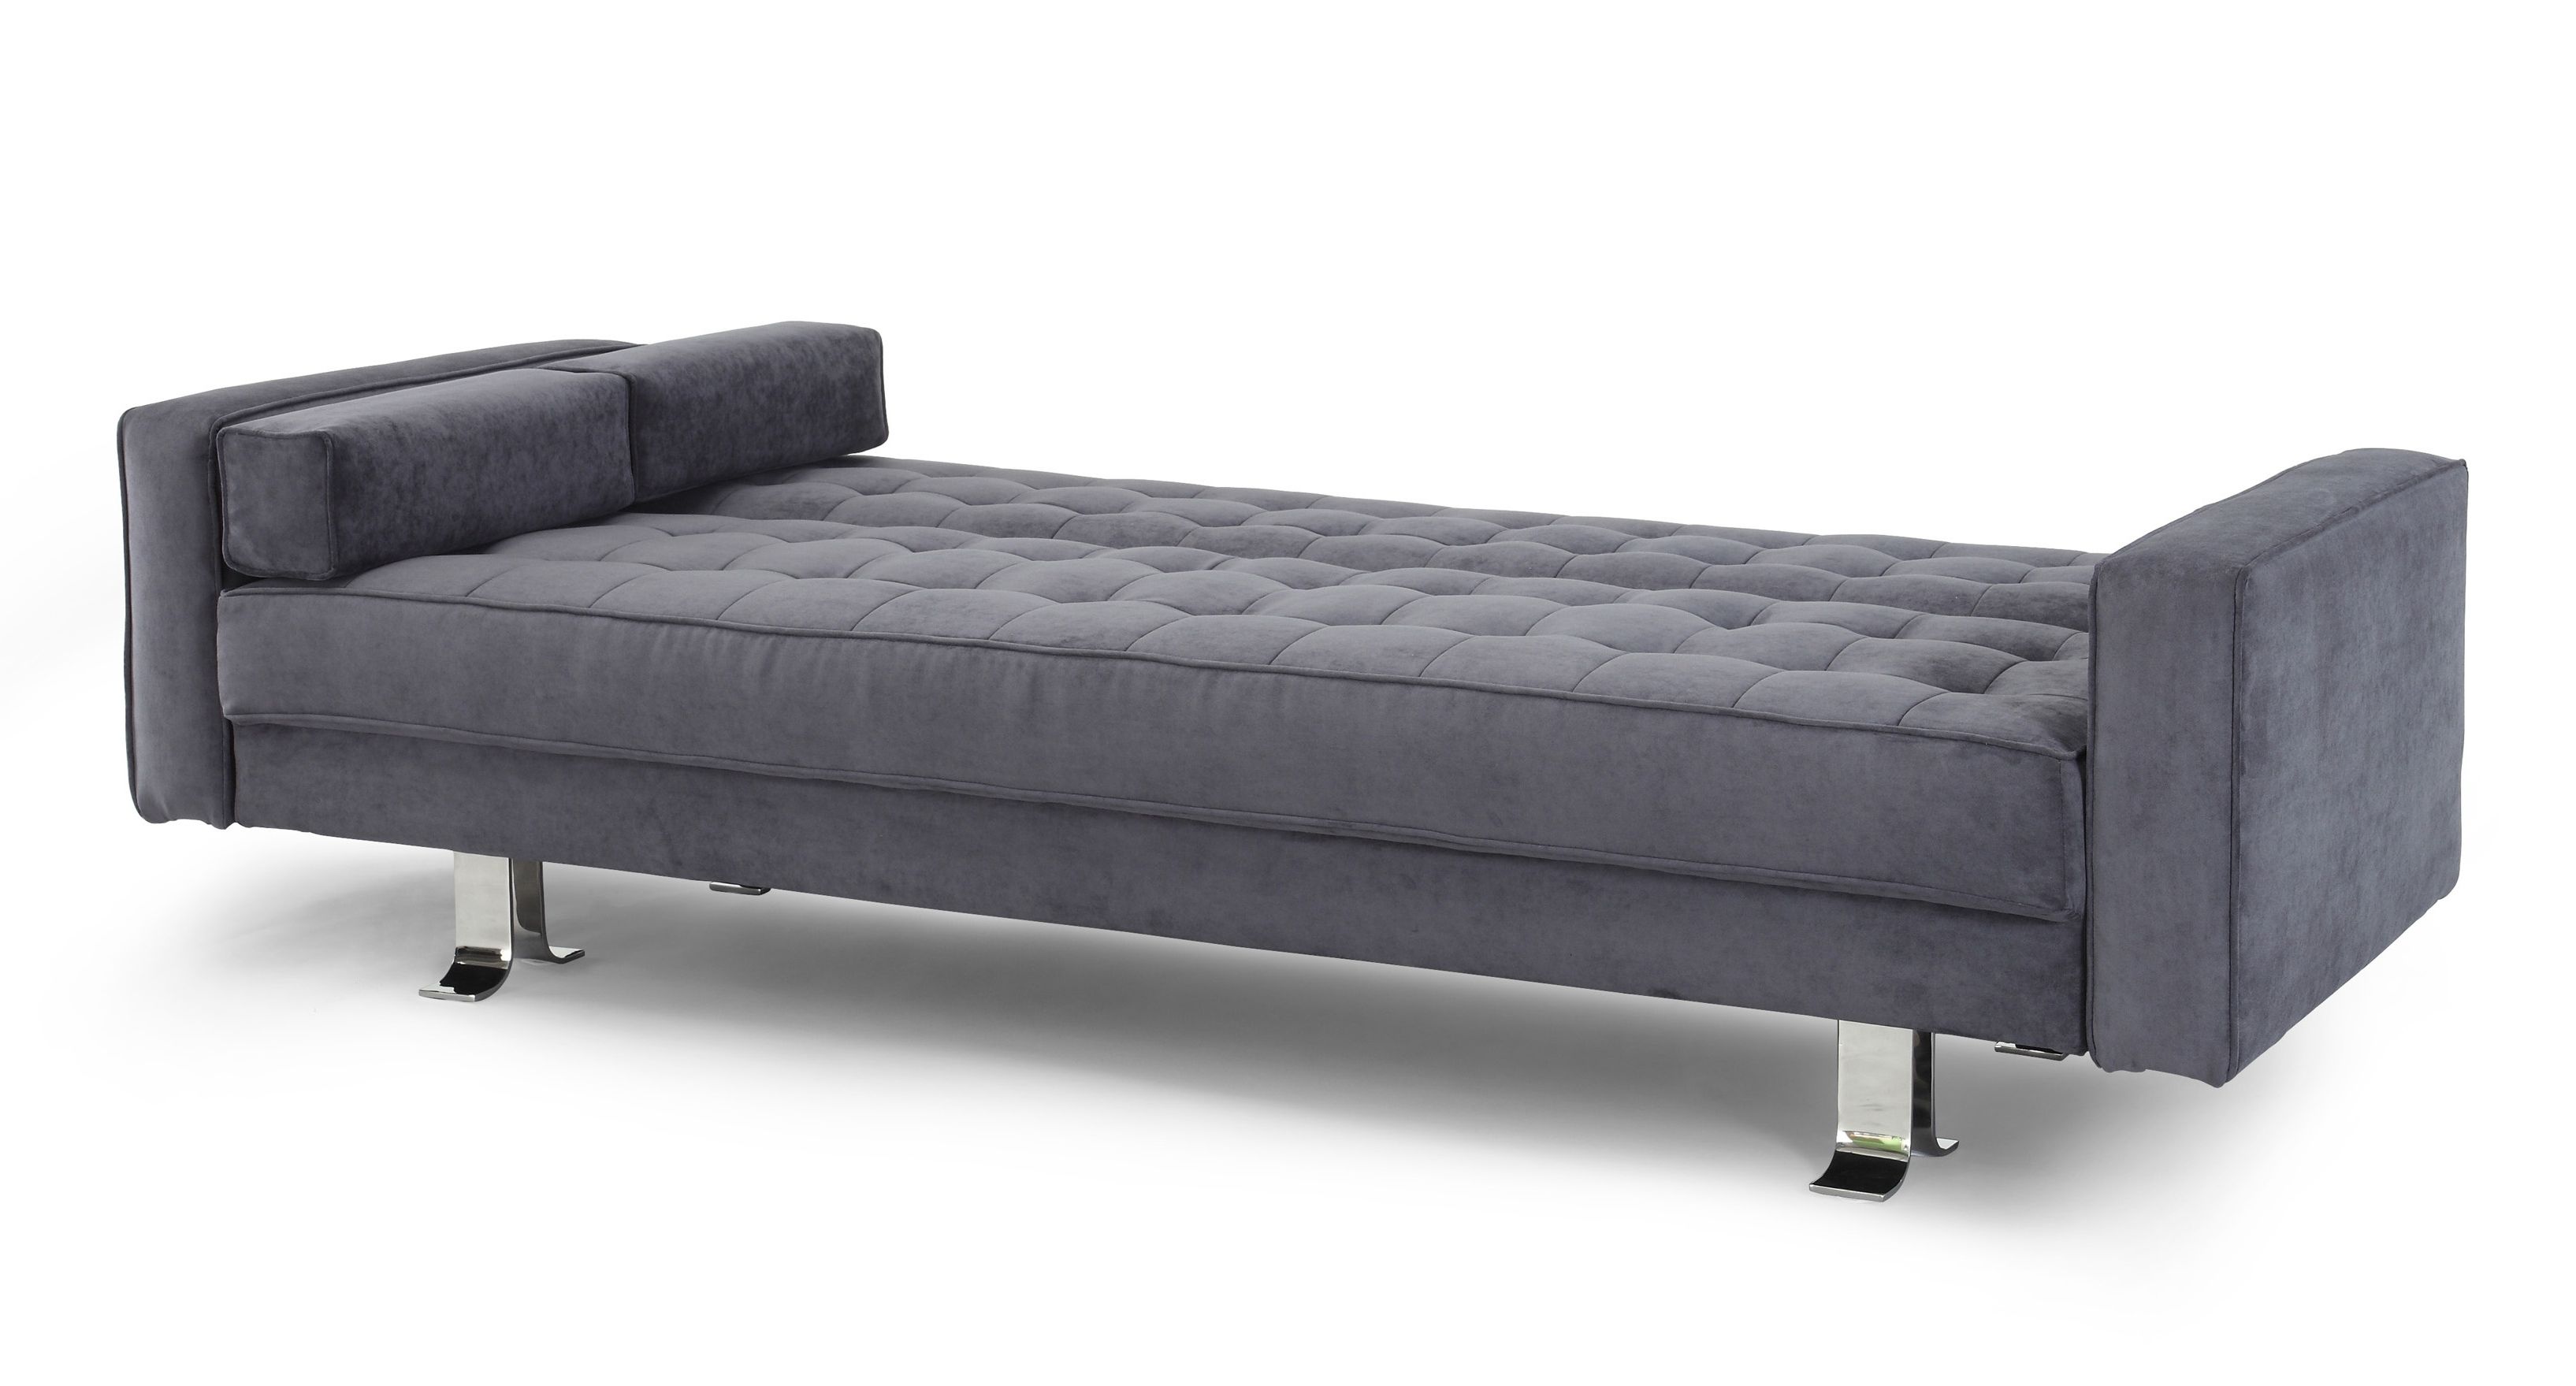 Convertible Sofas Intended For Widely Used Lifestyle Solutions Rudolpho Convertible Sofa Ga Rup Cc Set (View 1 of 20)